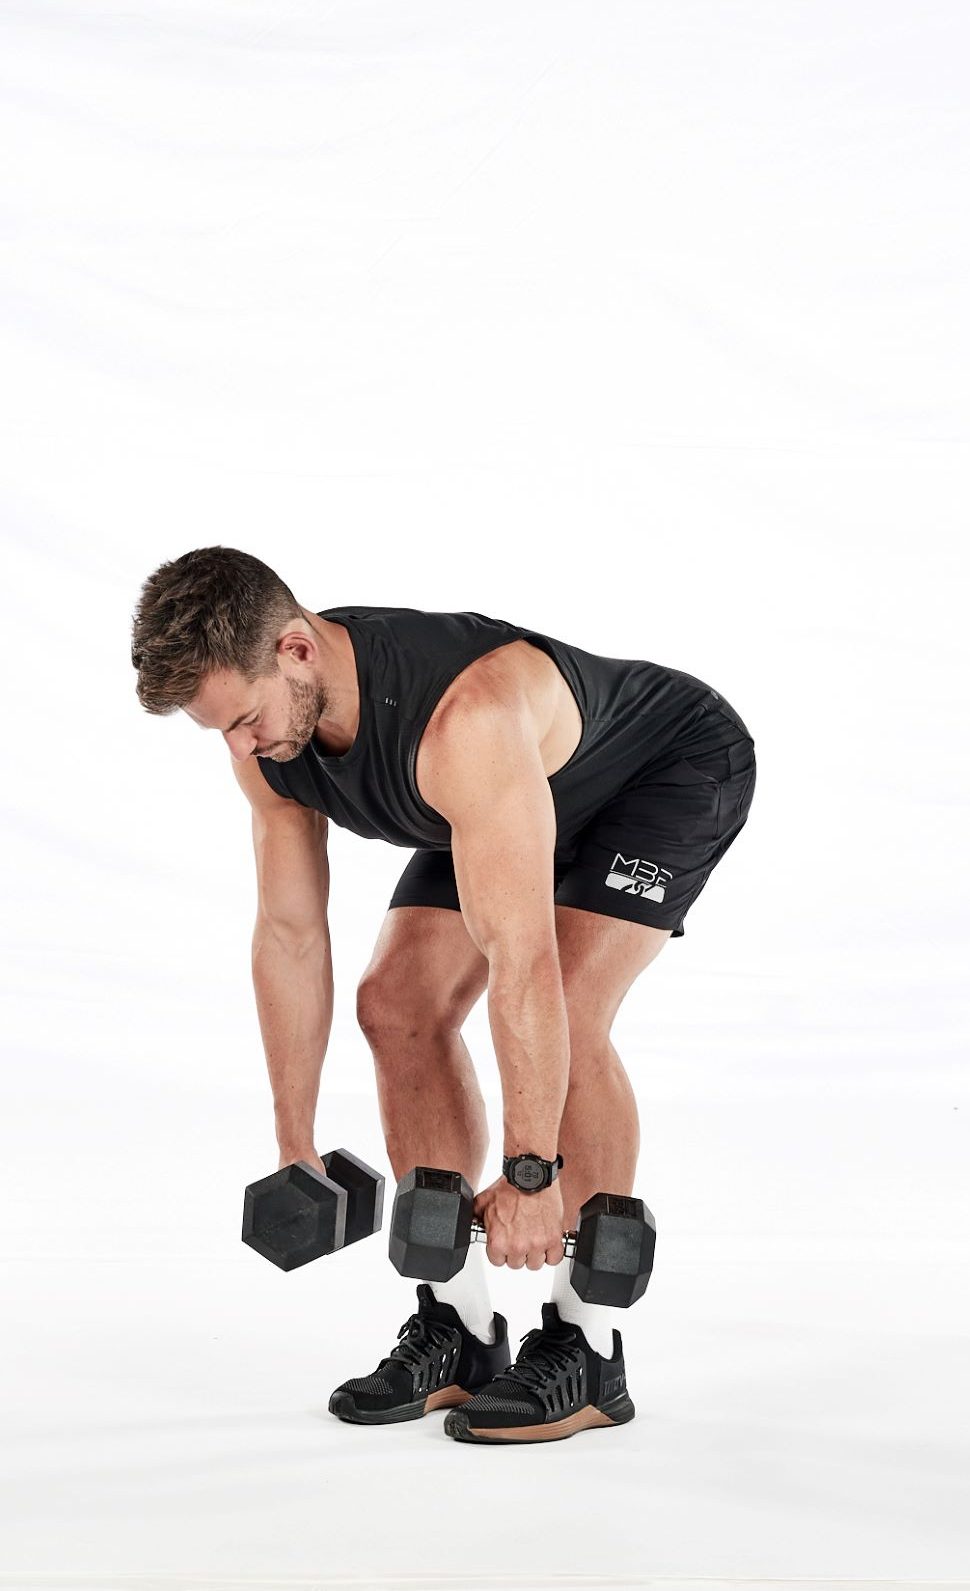 Two stages of the dumbbell bent-over row – holding dumbbells with bent knees, leaning forward from the hips, with weights hanging at knee level; then still leaning forward with weights pulled up towards lower sternum